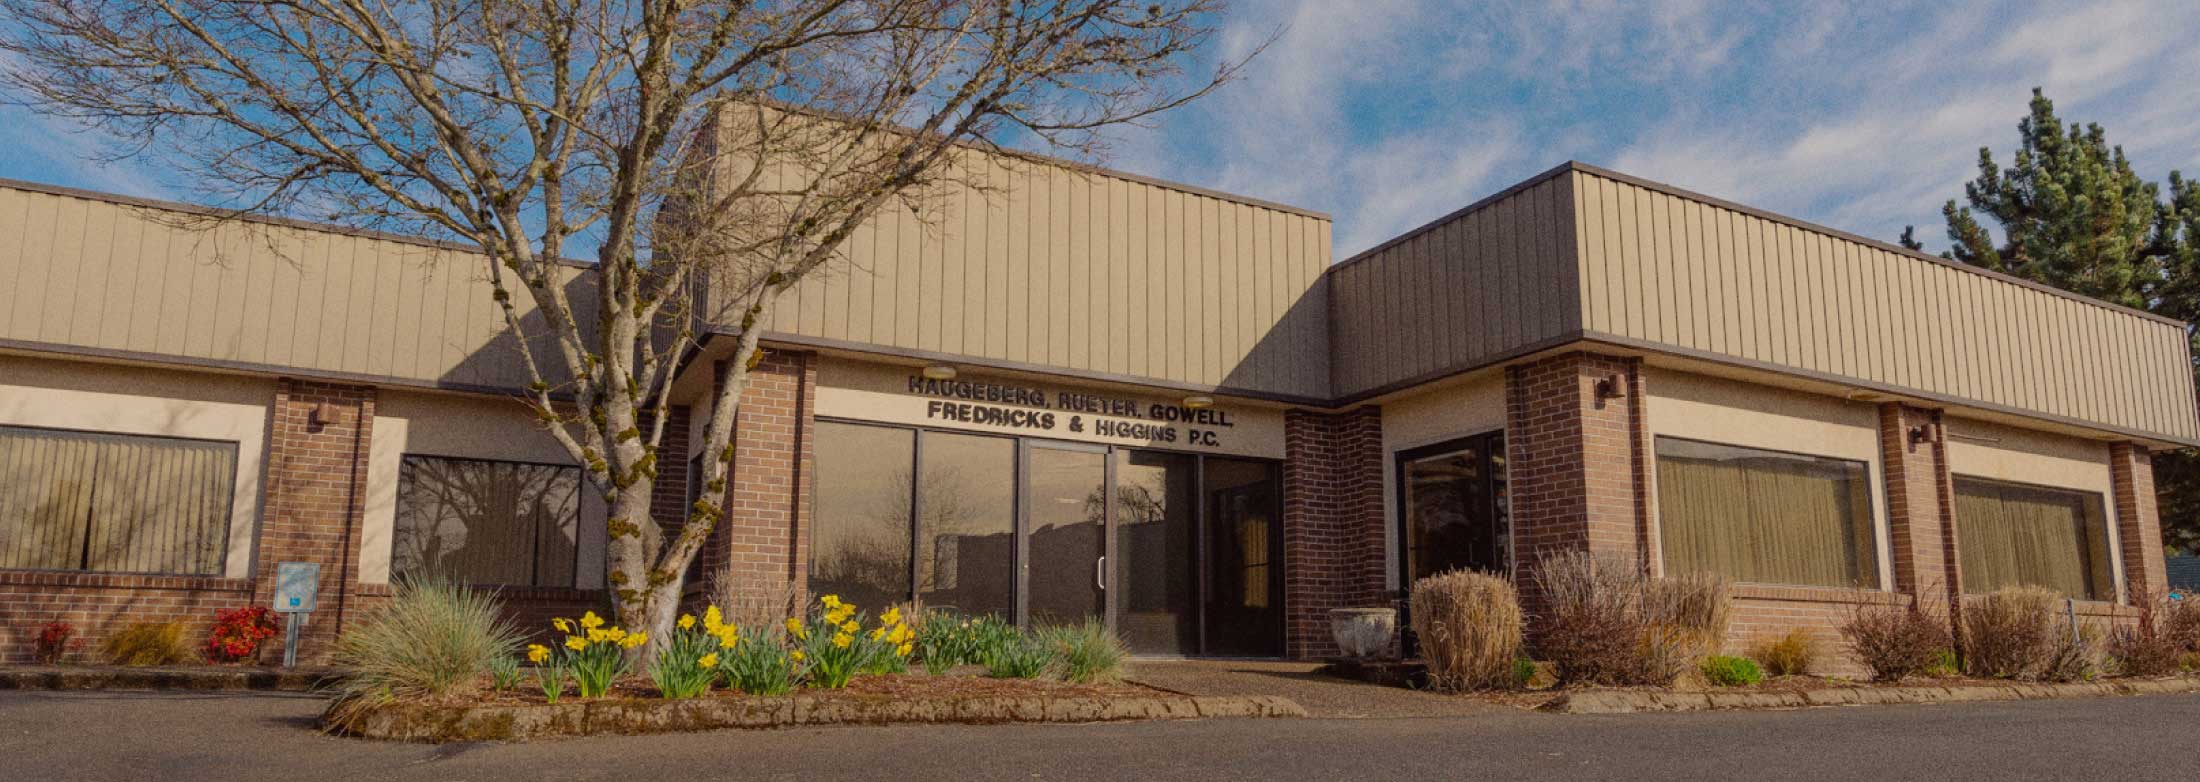 The McMinnville Office of Haugeberg, Rueter, Gowell, Fredericks & Higgins P.C.